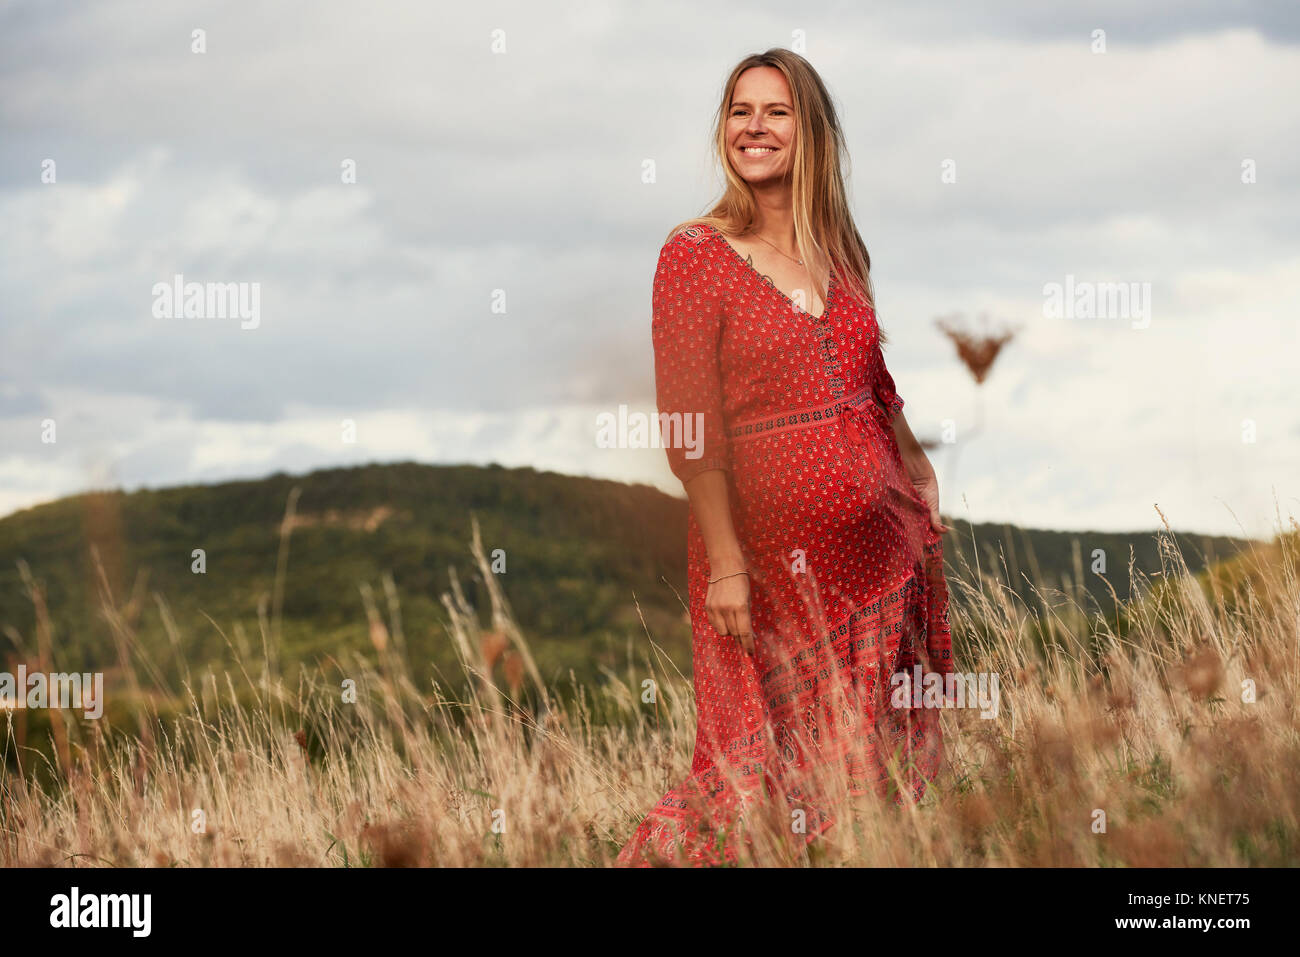 Portrait of happy pregnant woman in red dress on hillside Banque D'Images